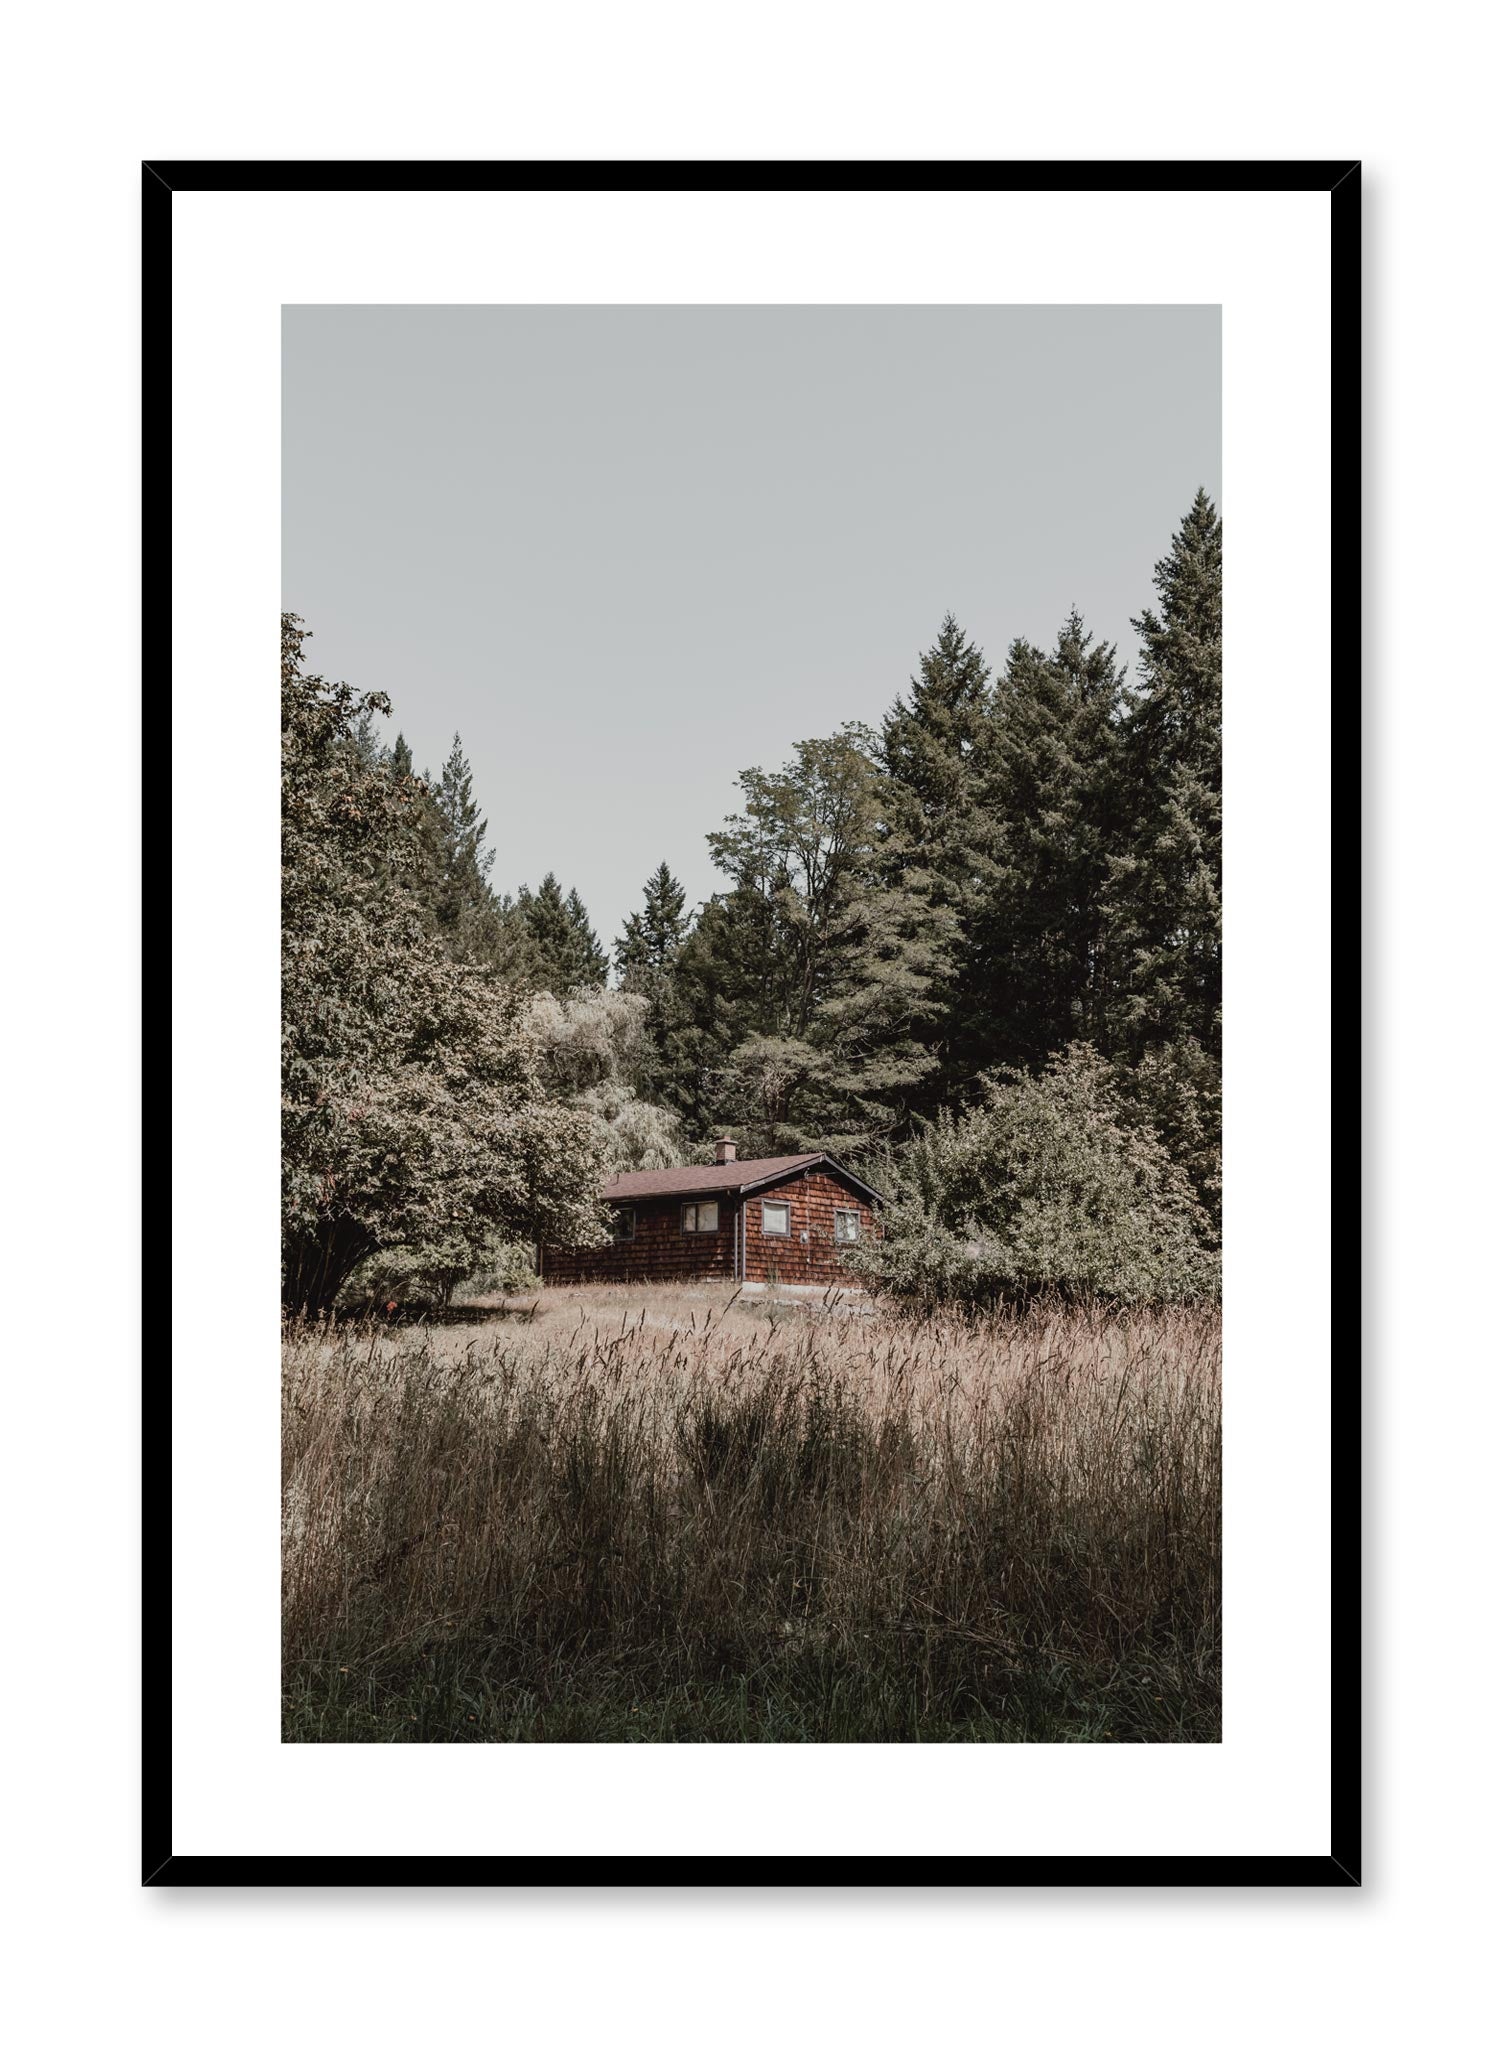 Minimalist design poster by Opposite Wall with nature photography of Vancouver Island Cottage in the forest